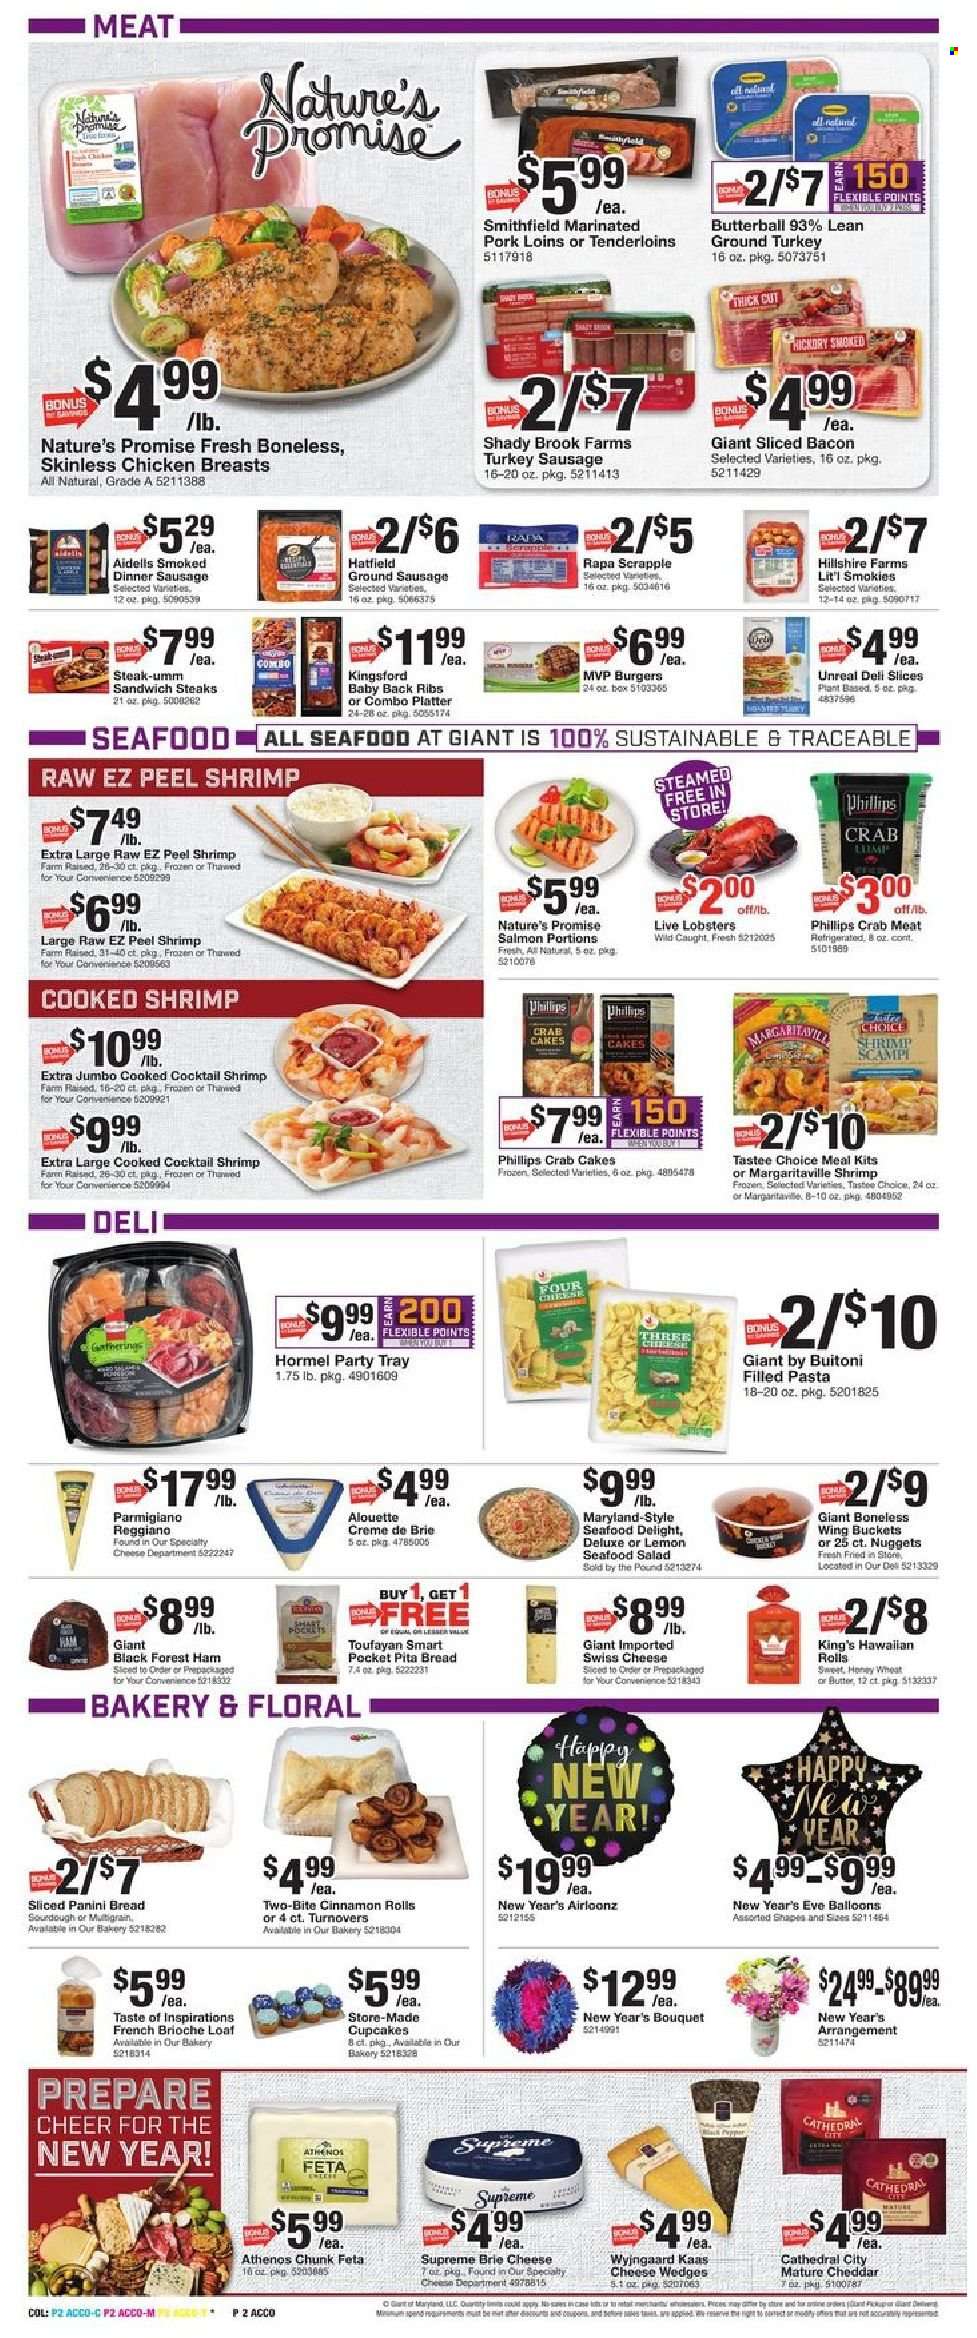 thumbnail - Giant Food Flyer - 12/26/2021 - 01/01/2022 - Sales products - bread, pita, panini, brioche, Nature’s Promise, turnovers, cinnamon roll, cupcake, salad, crab meat, lobster, salmon, seafood, shrimps, crab cake, sandwich, nuggets, hamburger, pasta, Hormel, Buitoni, filled pasta, bacon, Butterball, ham, sausage, seafood salad, swiss cheese, cheddar, cheese, brie, Parmigiano Reggiano, feta, ground turkey, chicken breasts, steak, pork meat, pork ribs, pork back ribs, marinated pork, balloons, Philips, bouquet. Page 2.